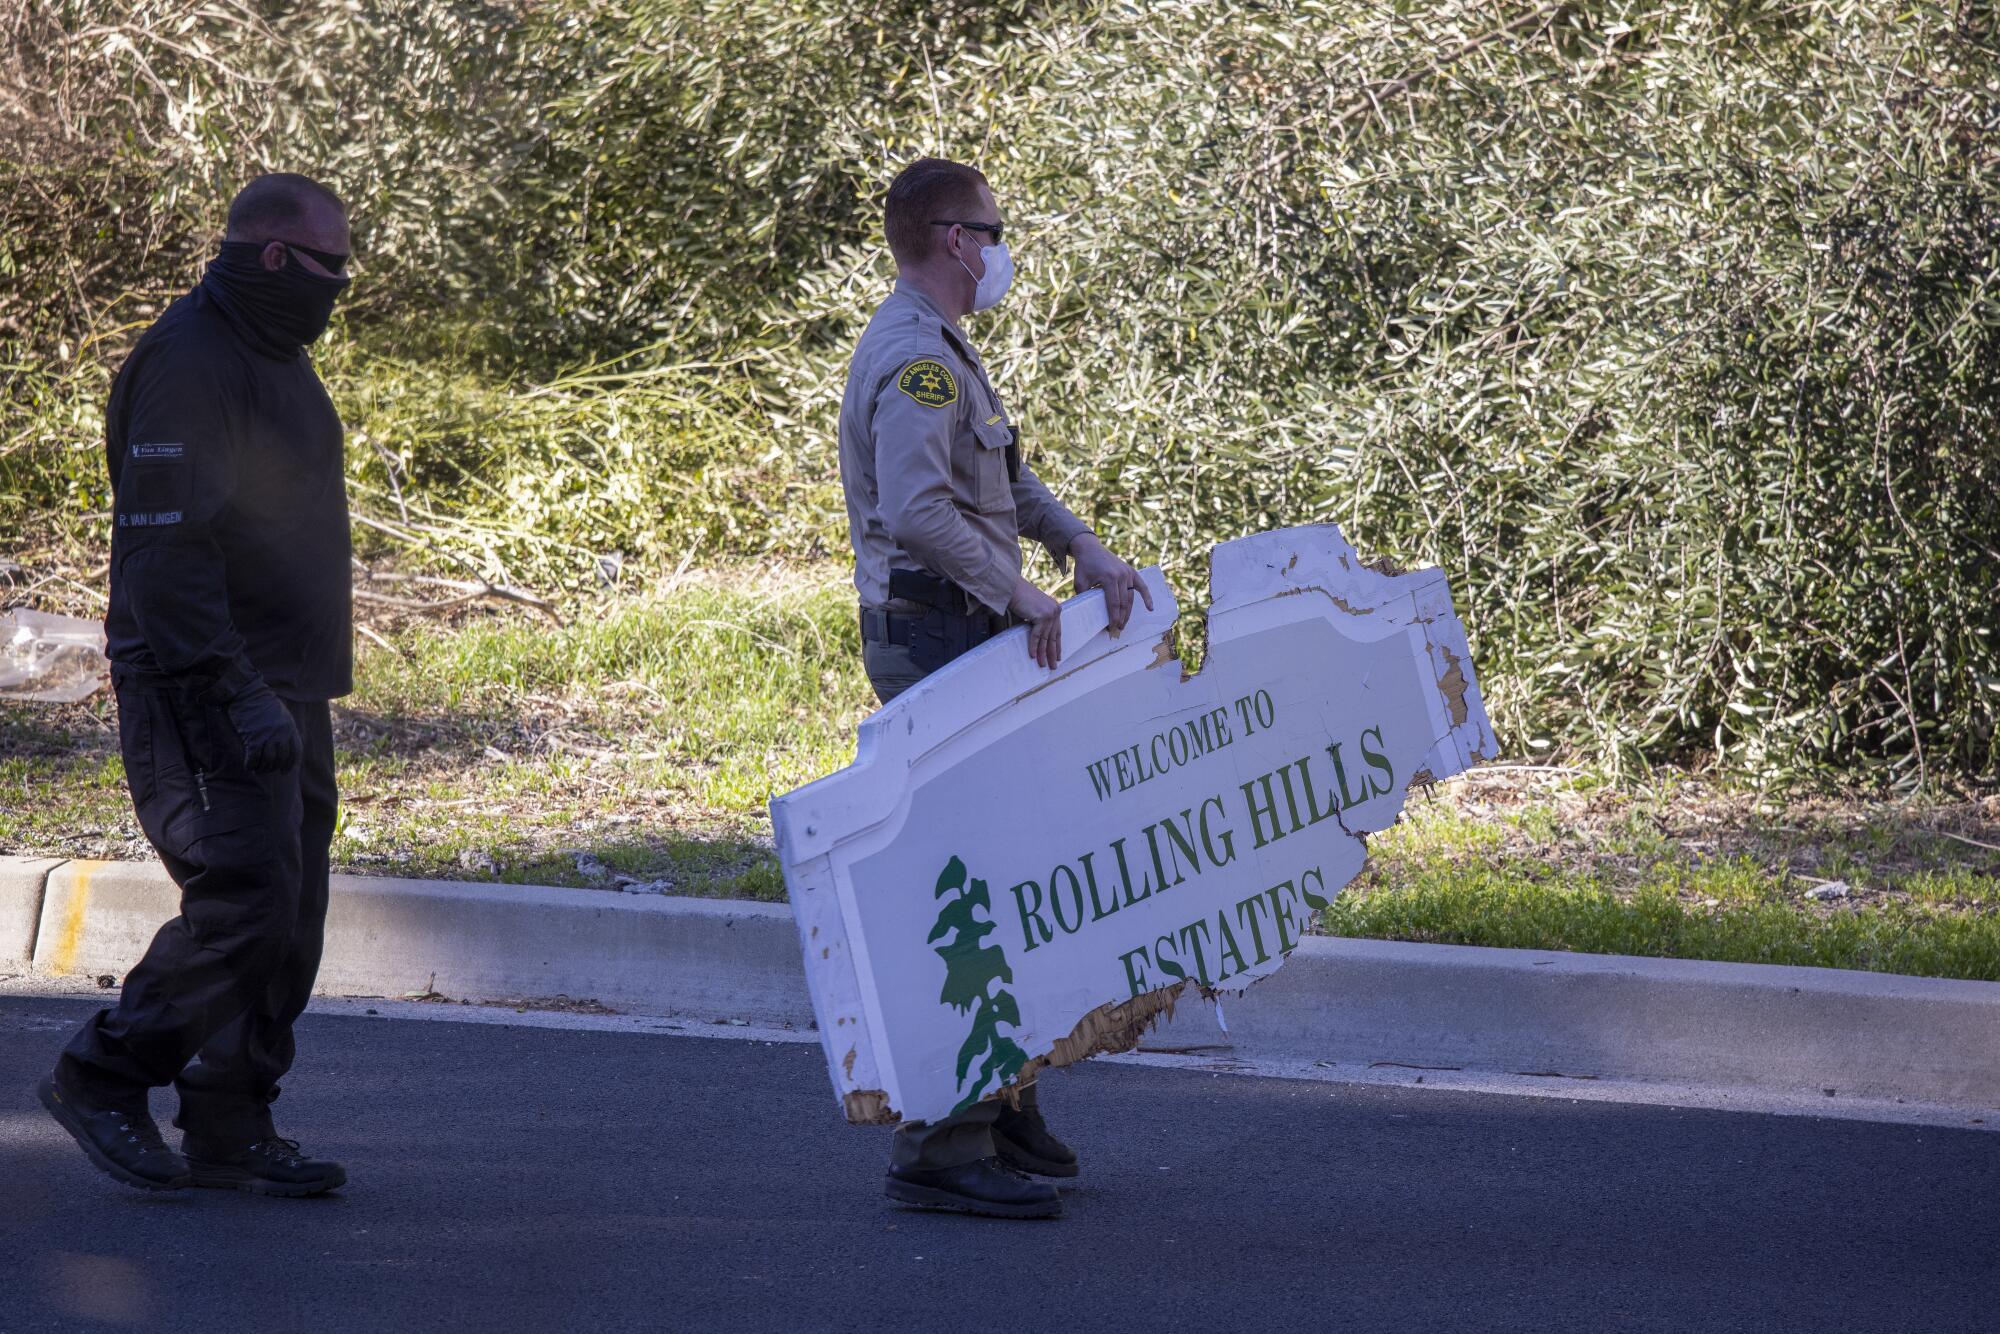 L.A. County Sheriff deputy picks up a damaged sign that reads "Welcome to Rolling Hills Estates" from the scene 